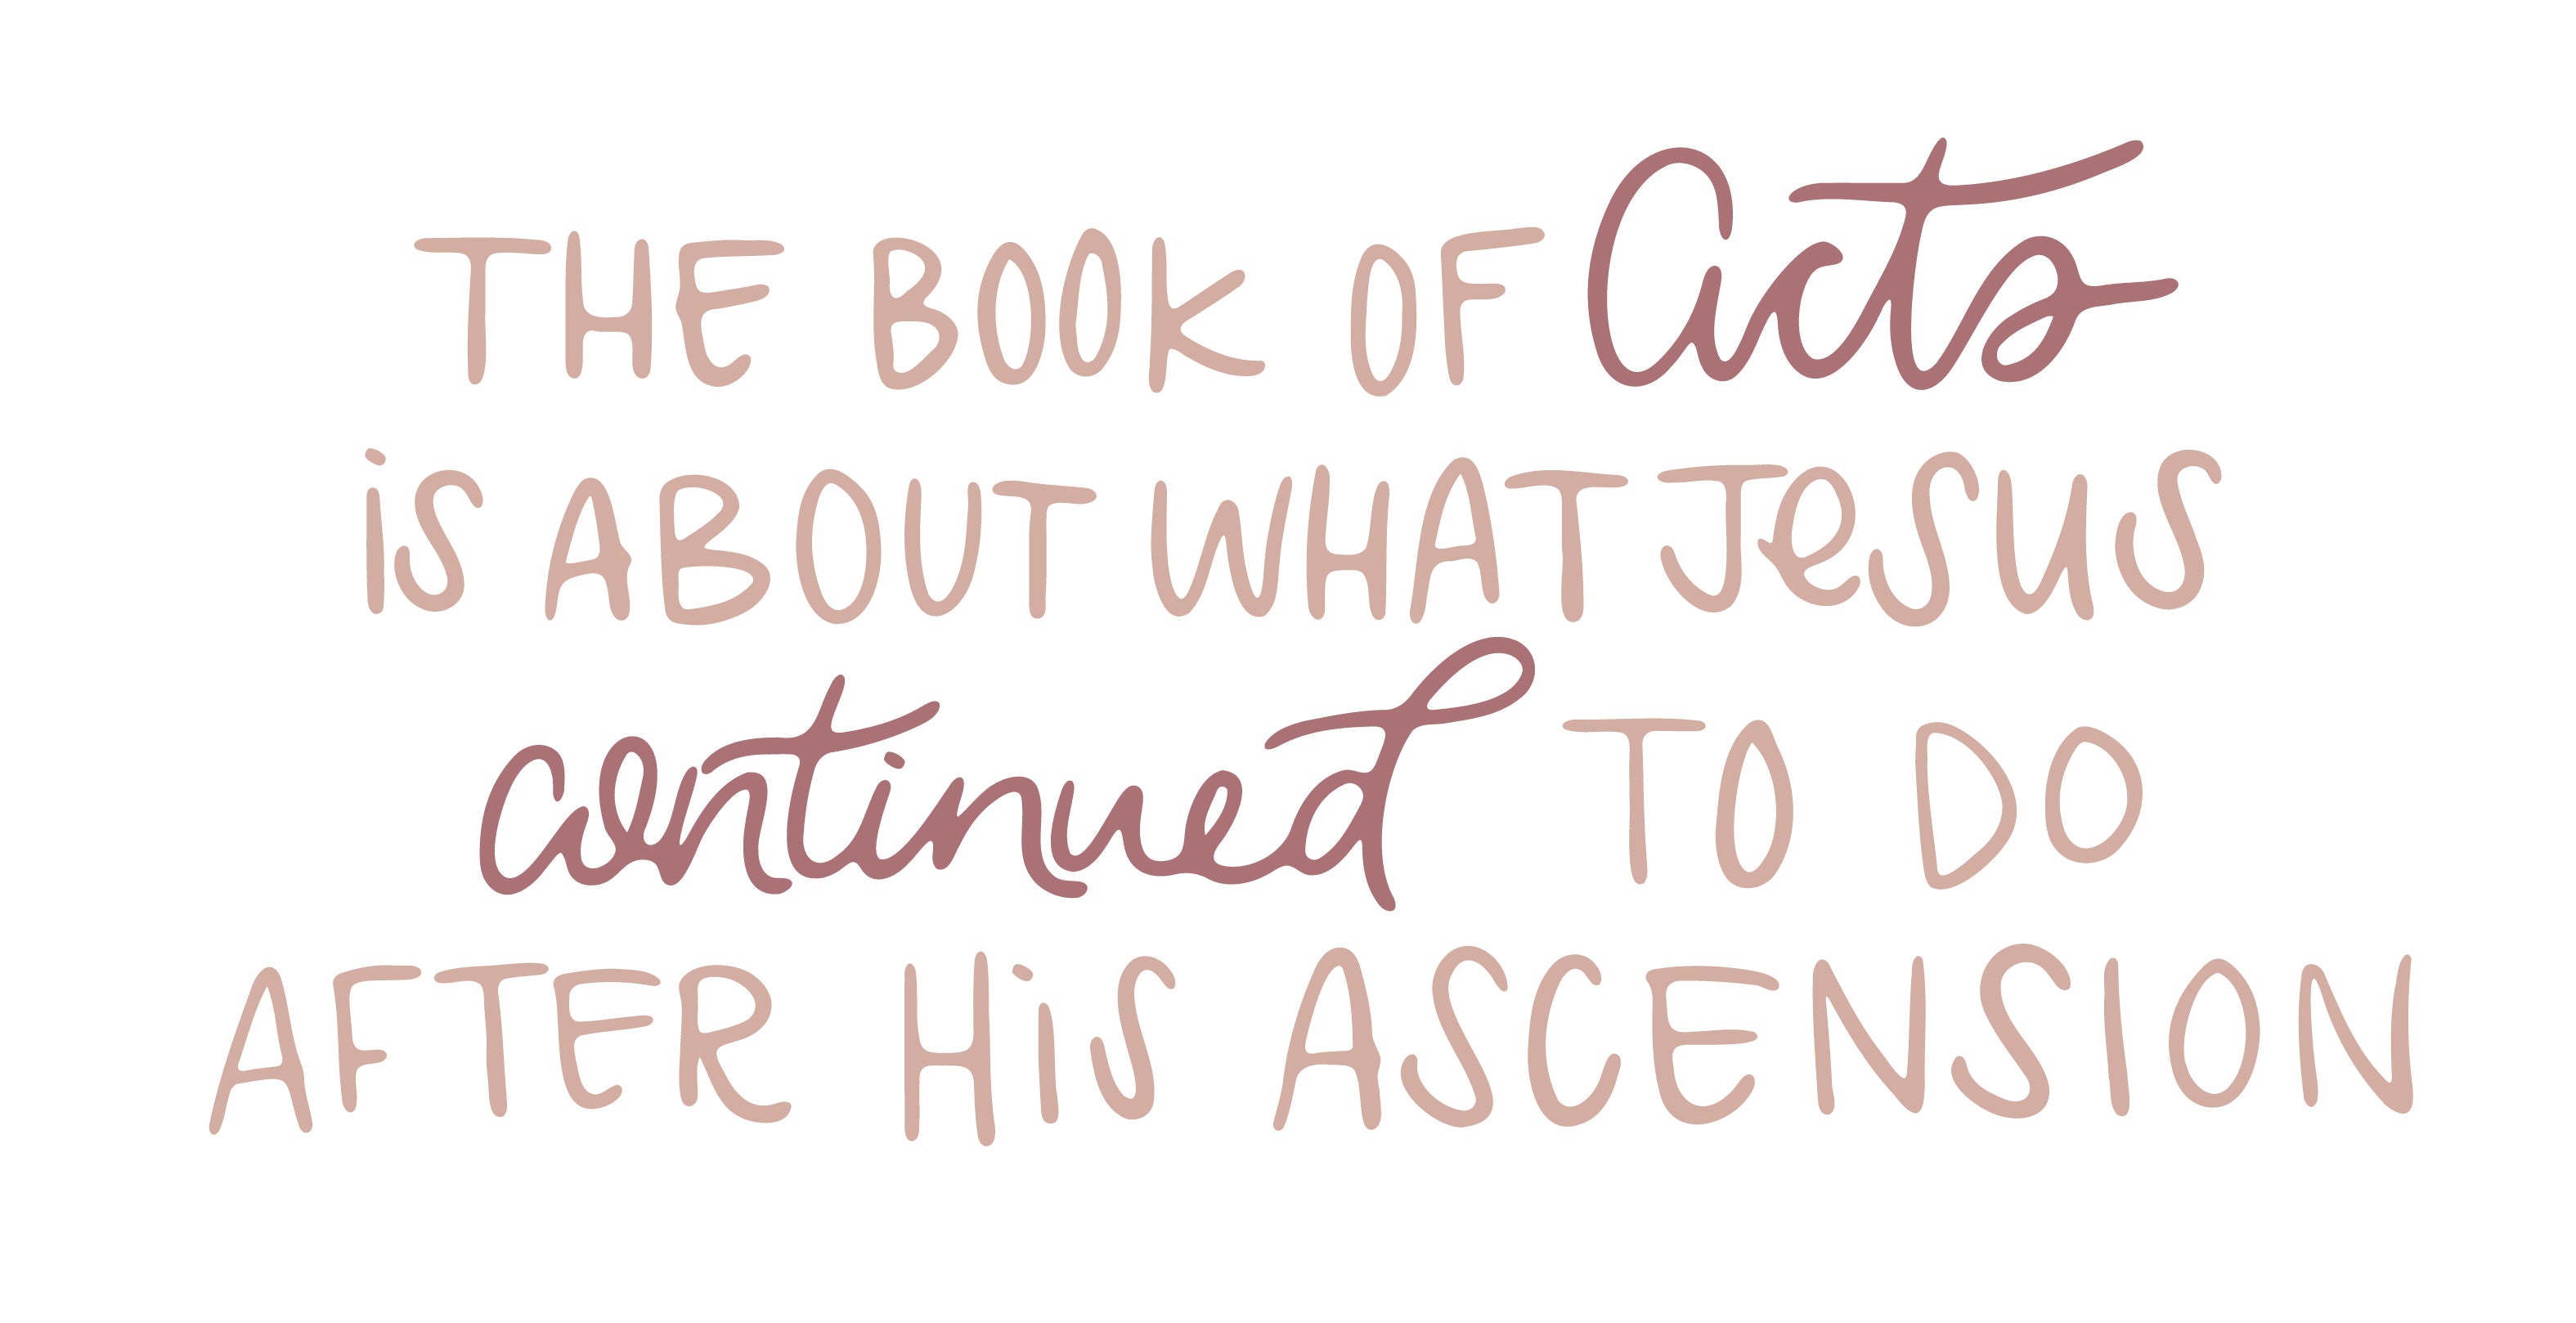 The book of Acts is about what Jesus continued to do after His ascension | TDGC